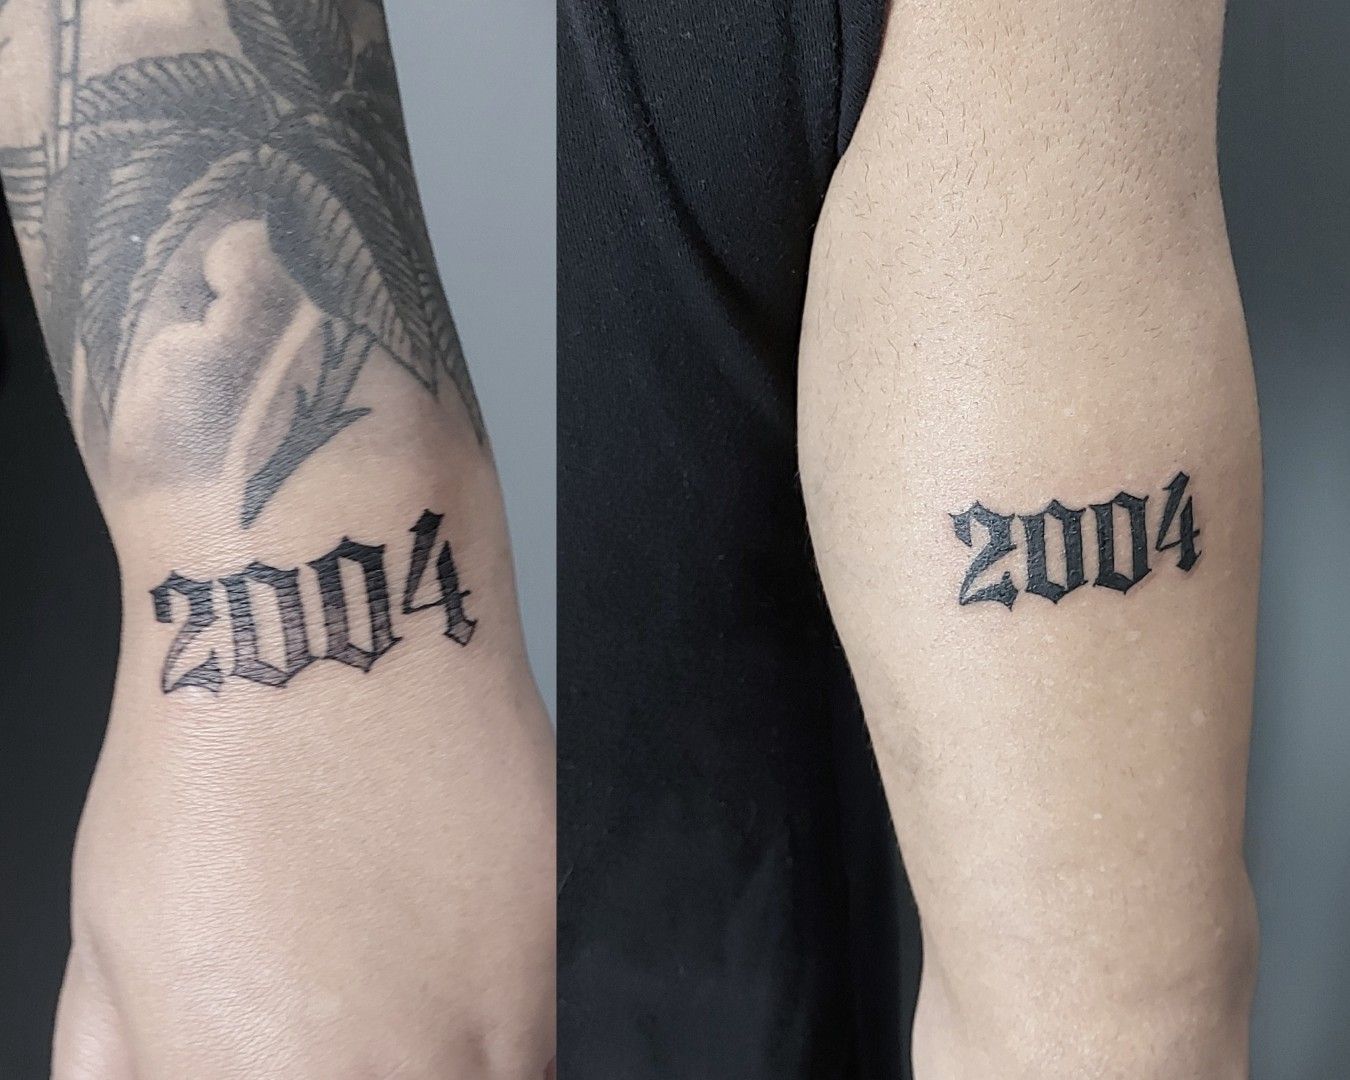 20 Awesome 1999 Tattoo Design Ideas That Will Absolutely Amuse You  Tattoo  Twist